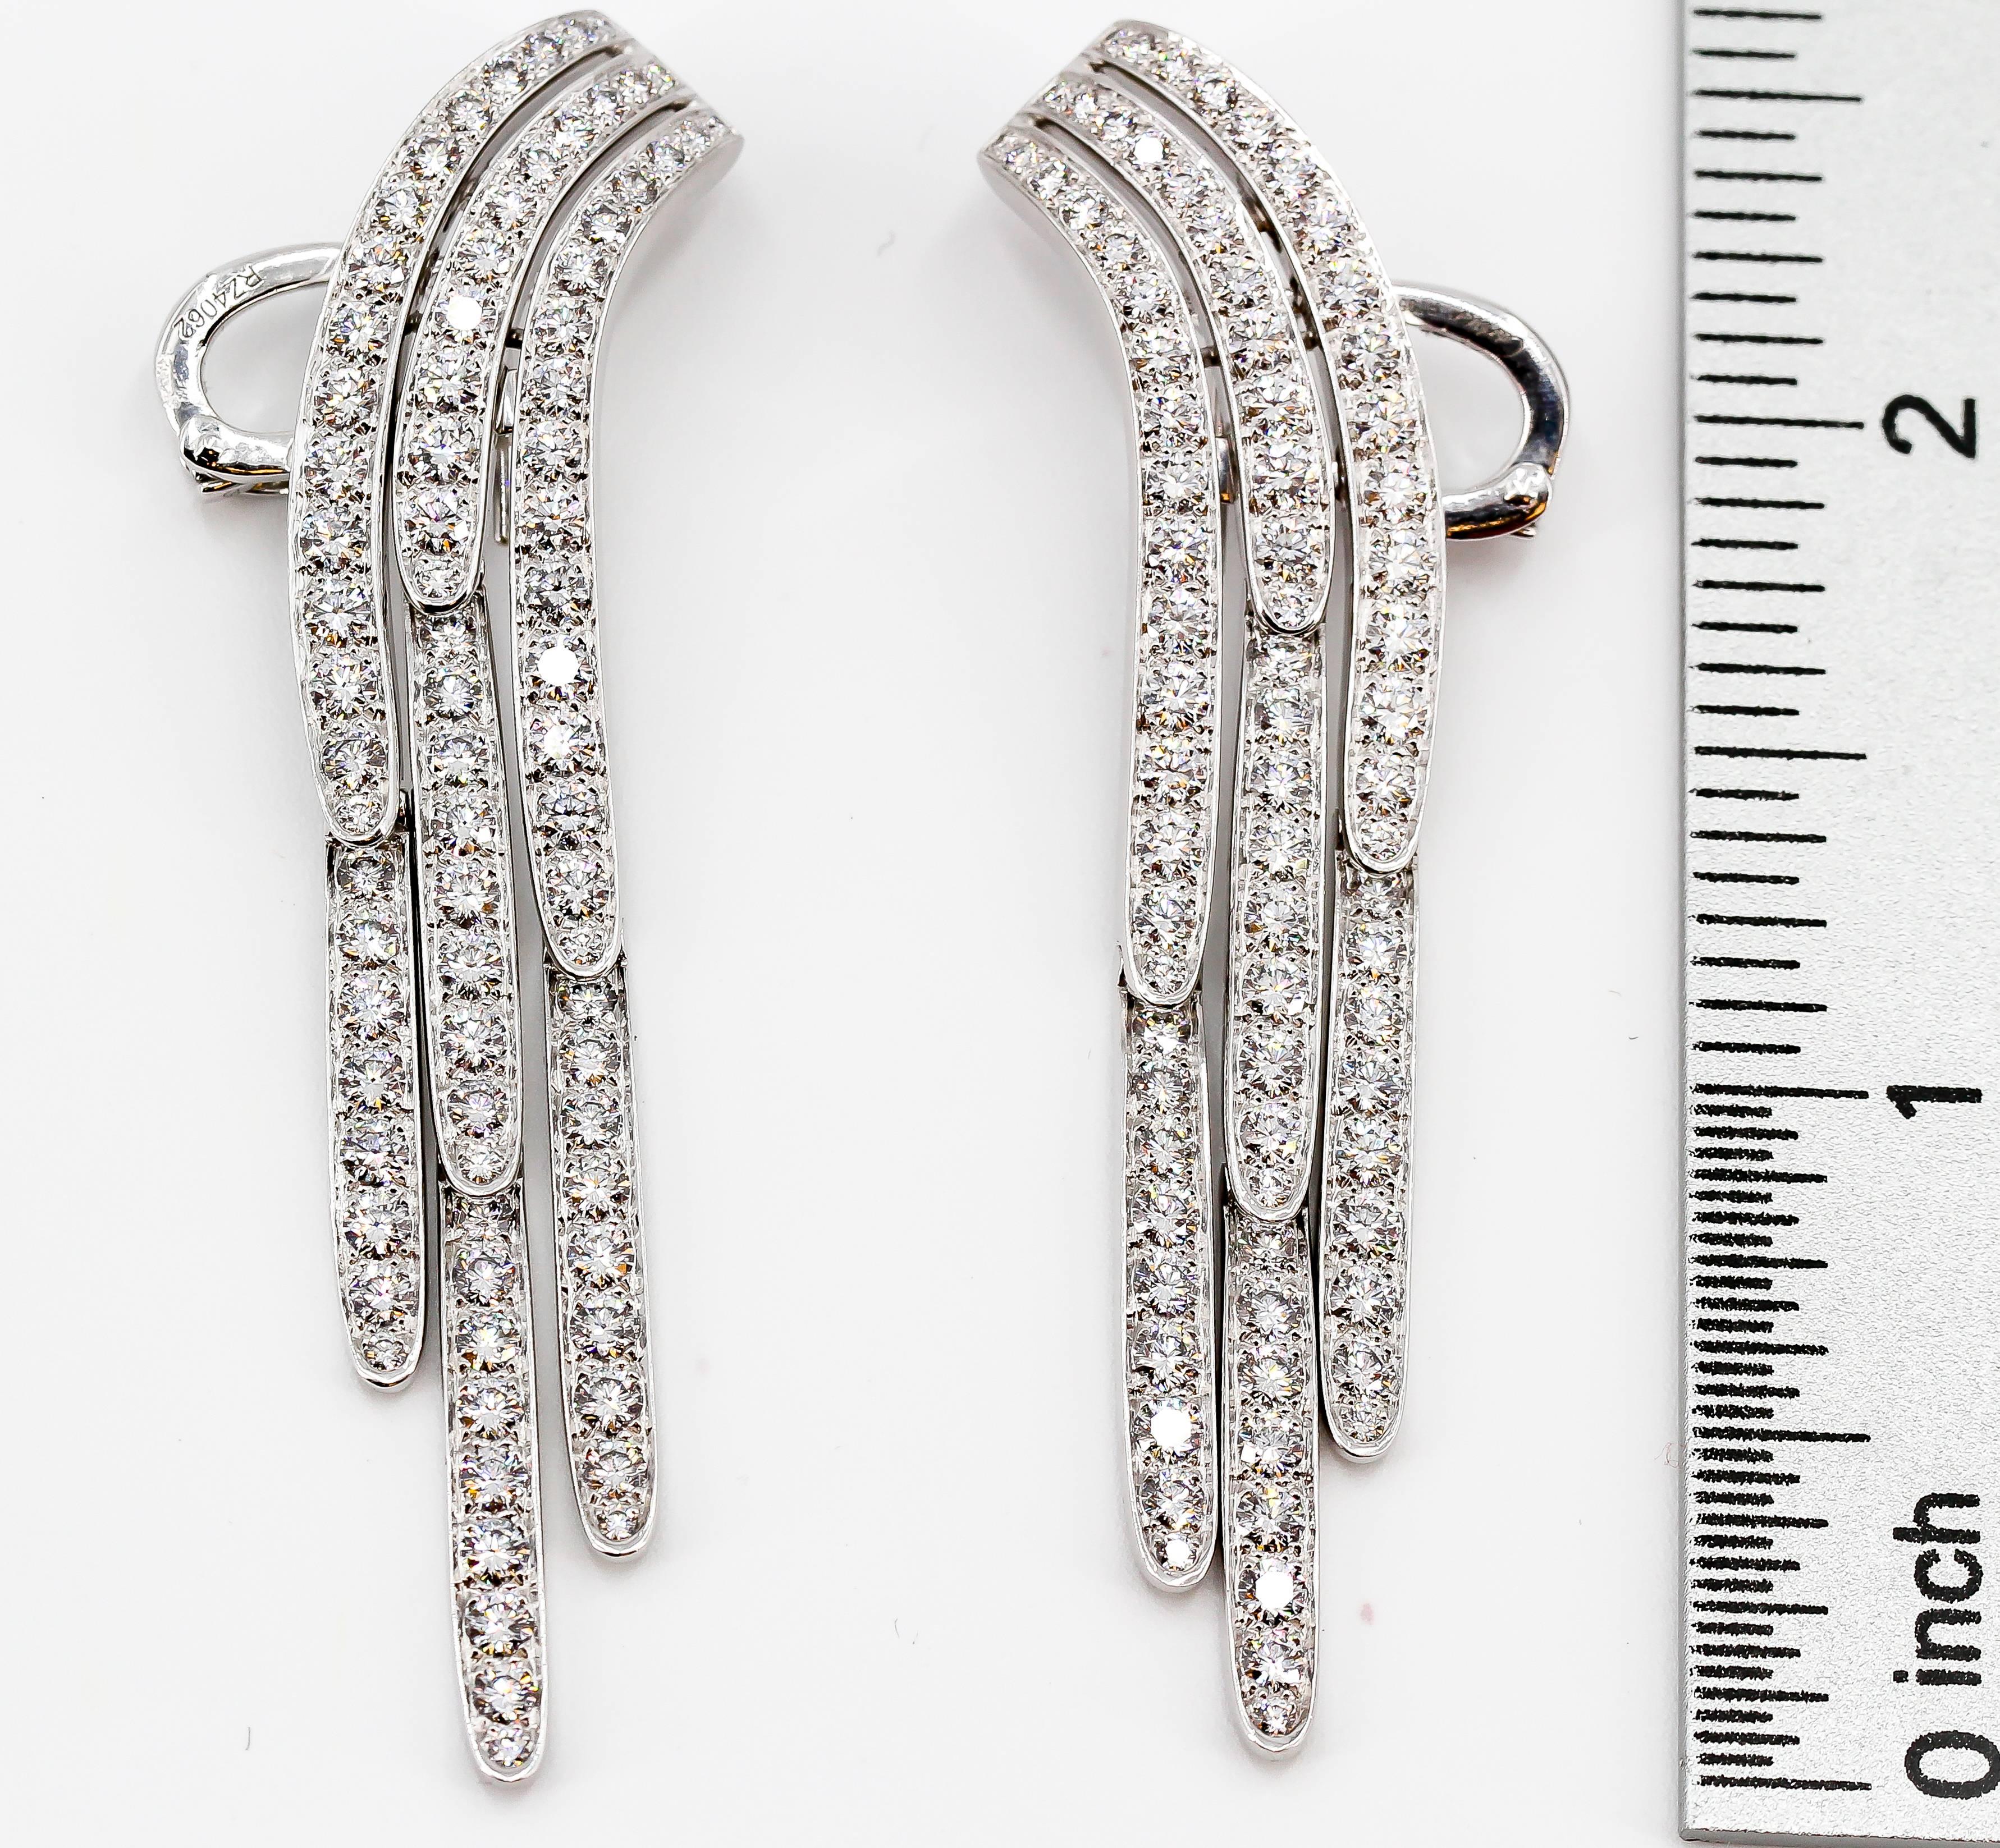 Chic diamond and platinum drop earrings by Cartier. 

Hallmarks: Cartier, PT950, reference numbers